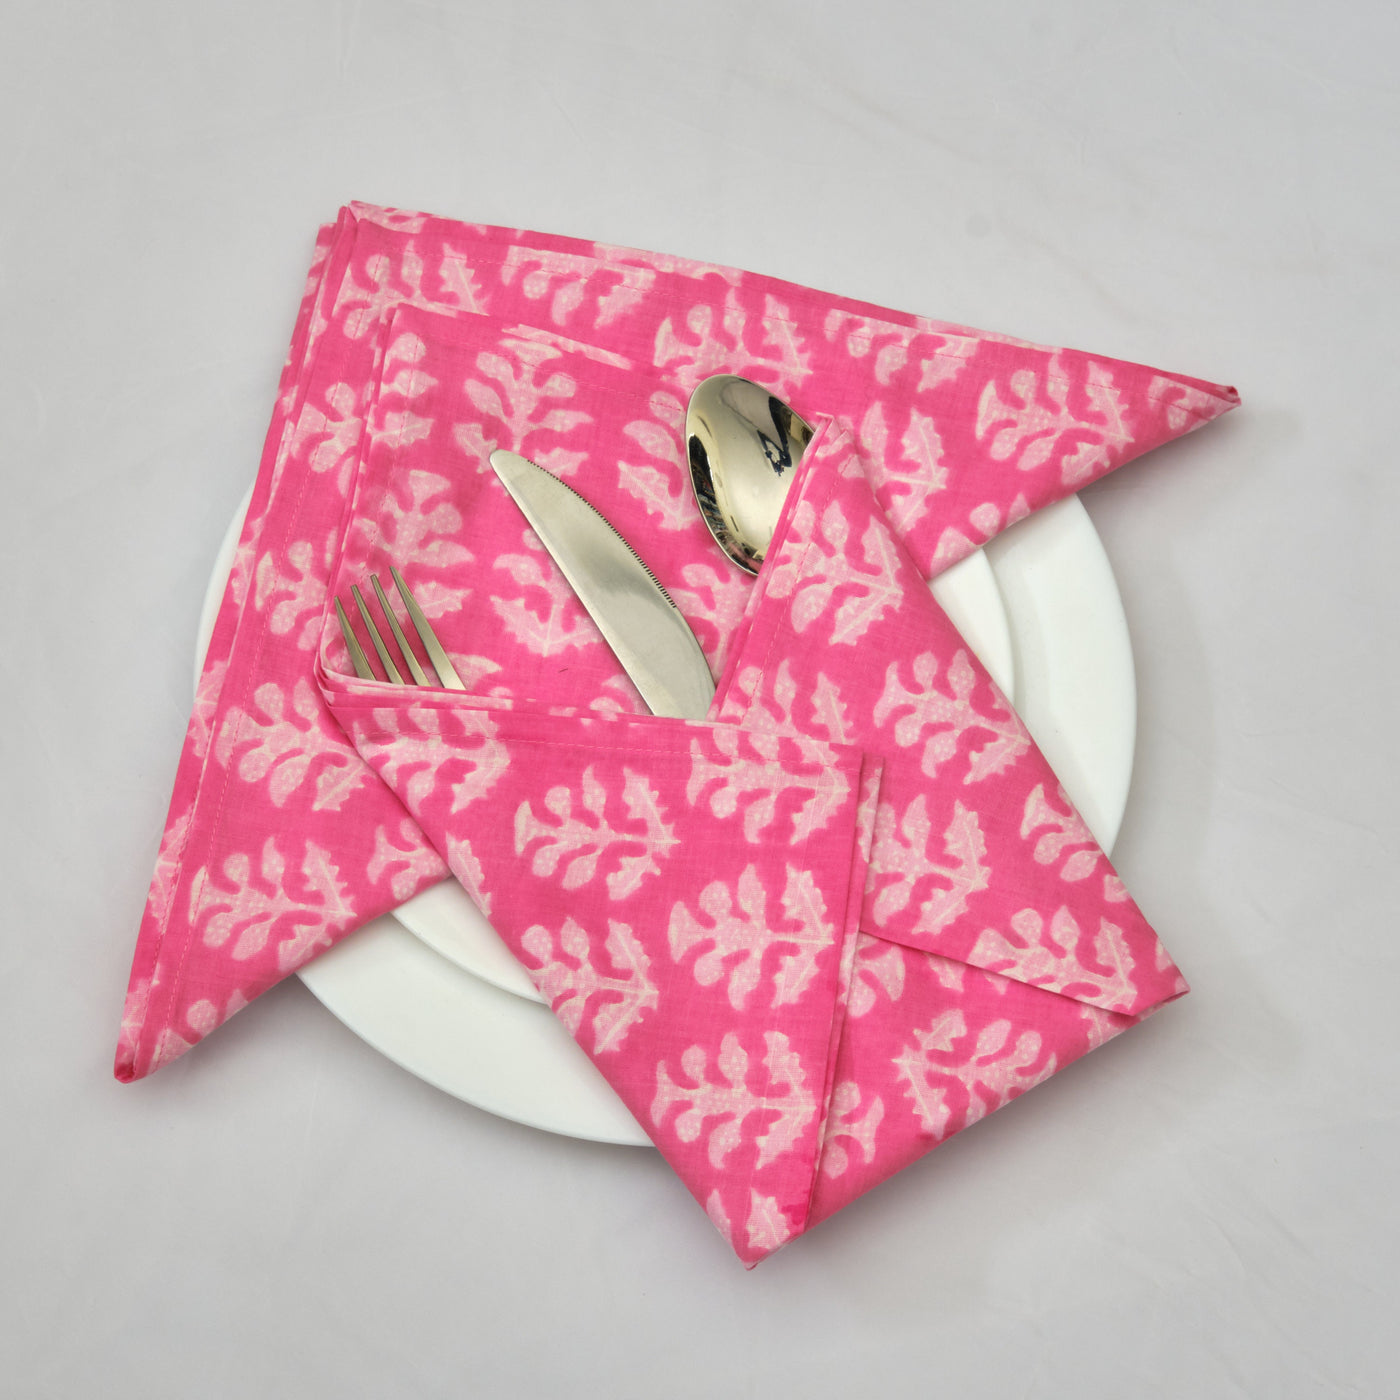 Watermelon and Lemonade Pink  Indian Floral Hand Block Printed Pure Pure Cotton Cloth Napkins, 18x18"Cocktail Napkin, 20x20" Dinner Napkins